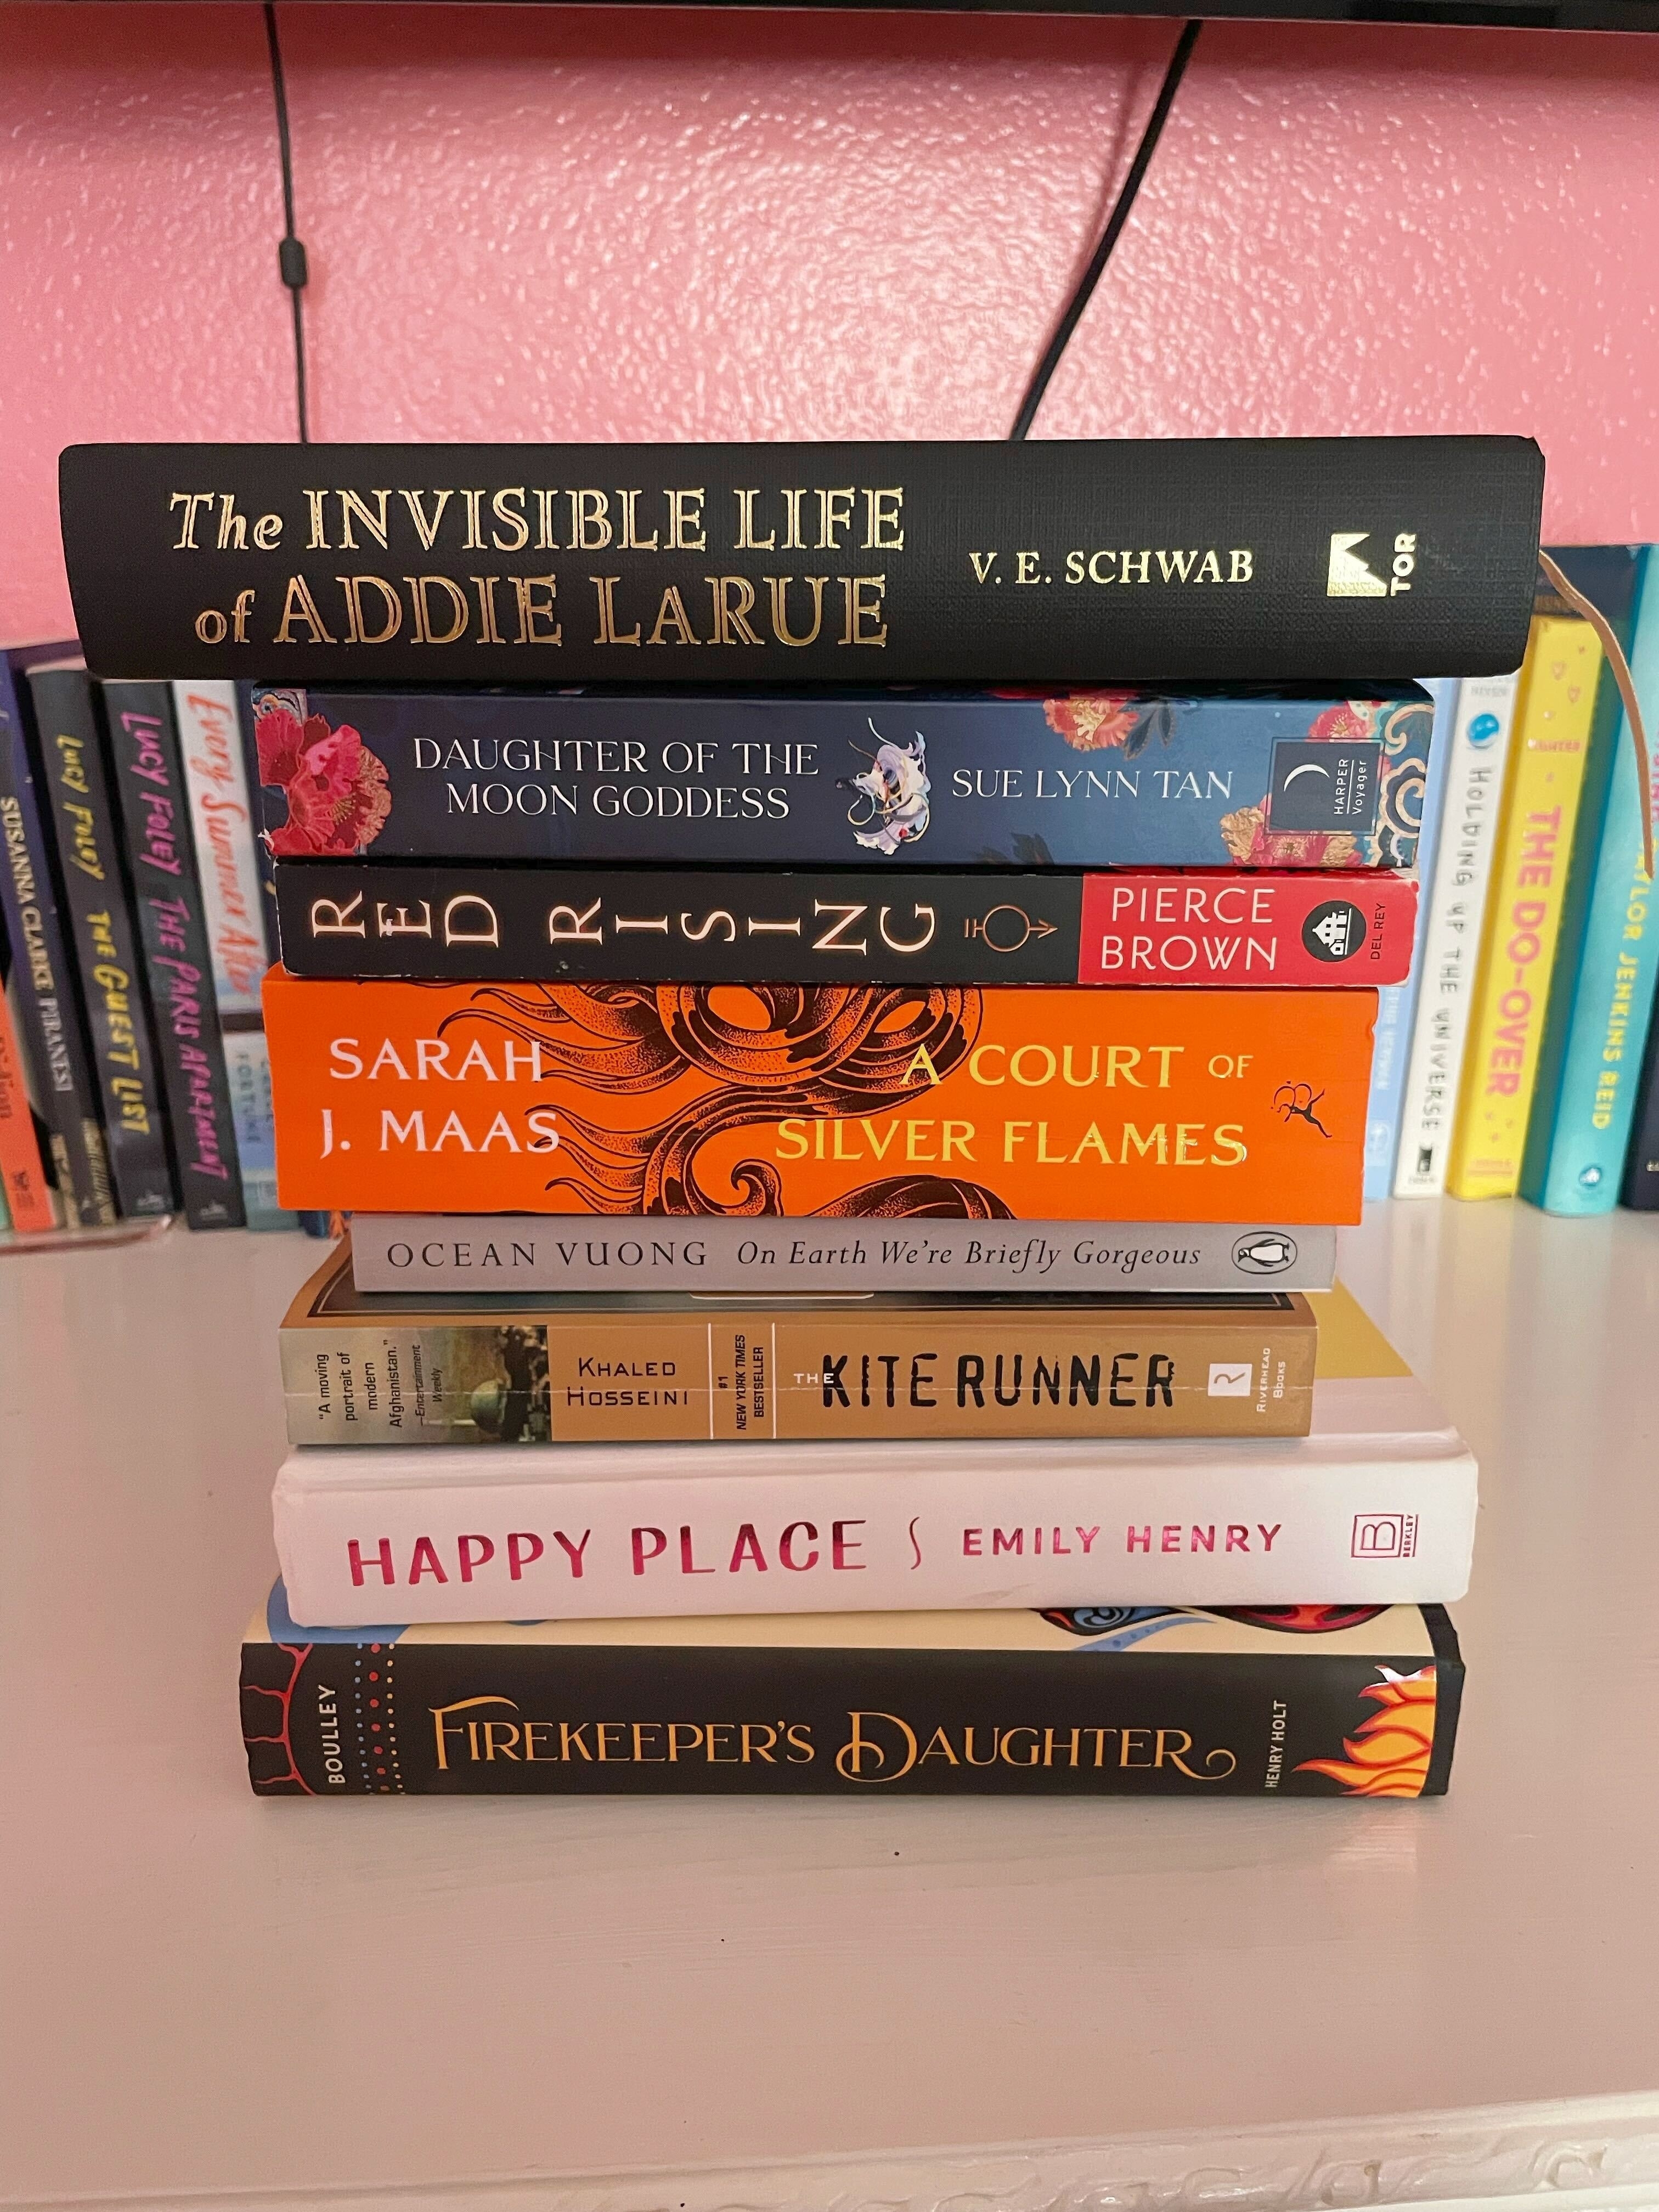 The author is showing some of her favorite books of the year stacked up